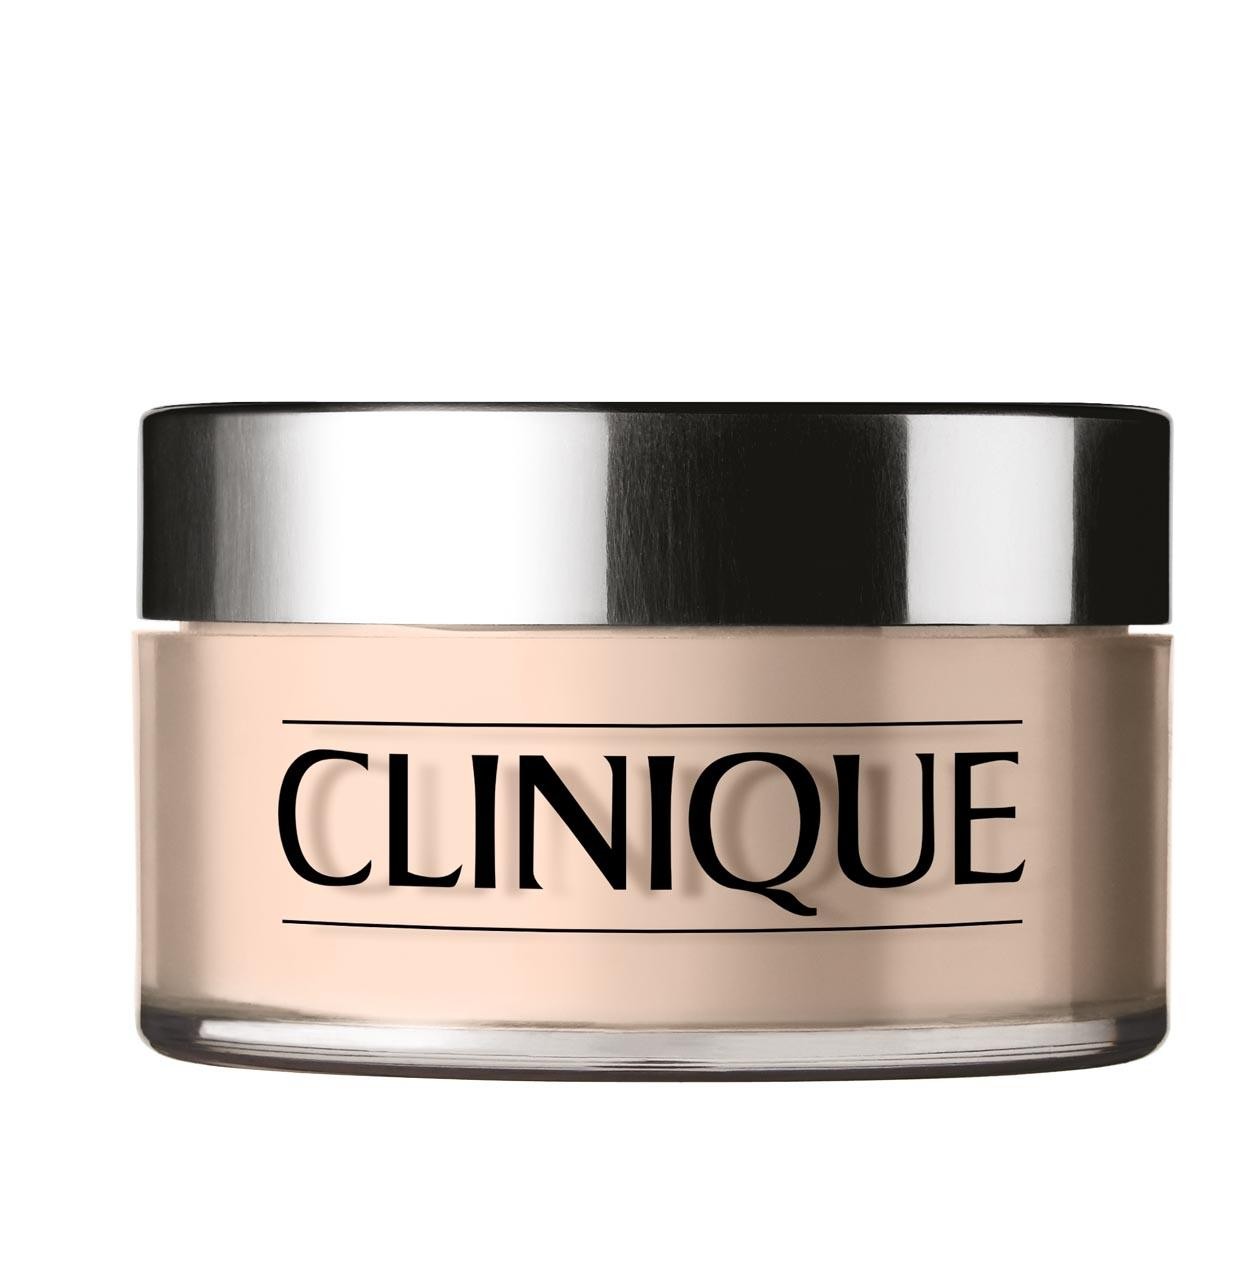 Clinique Blended Face Powder Trasparency 03 25g